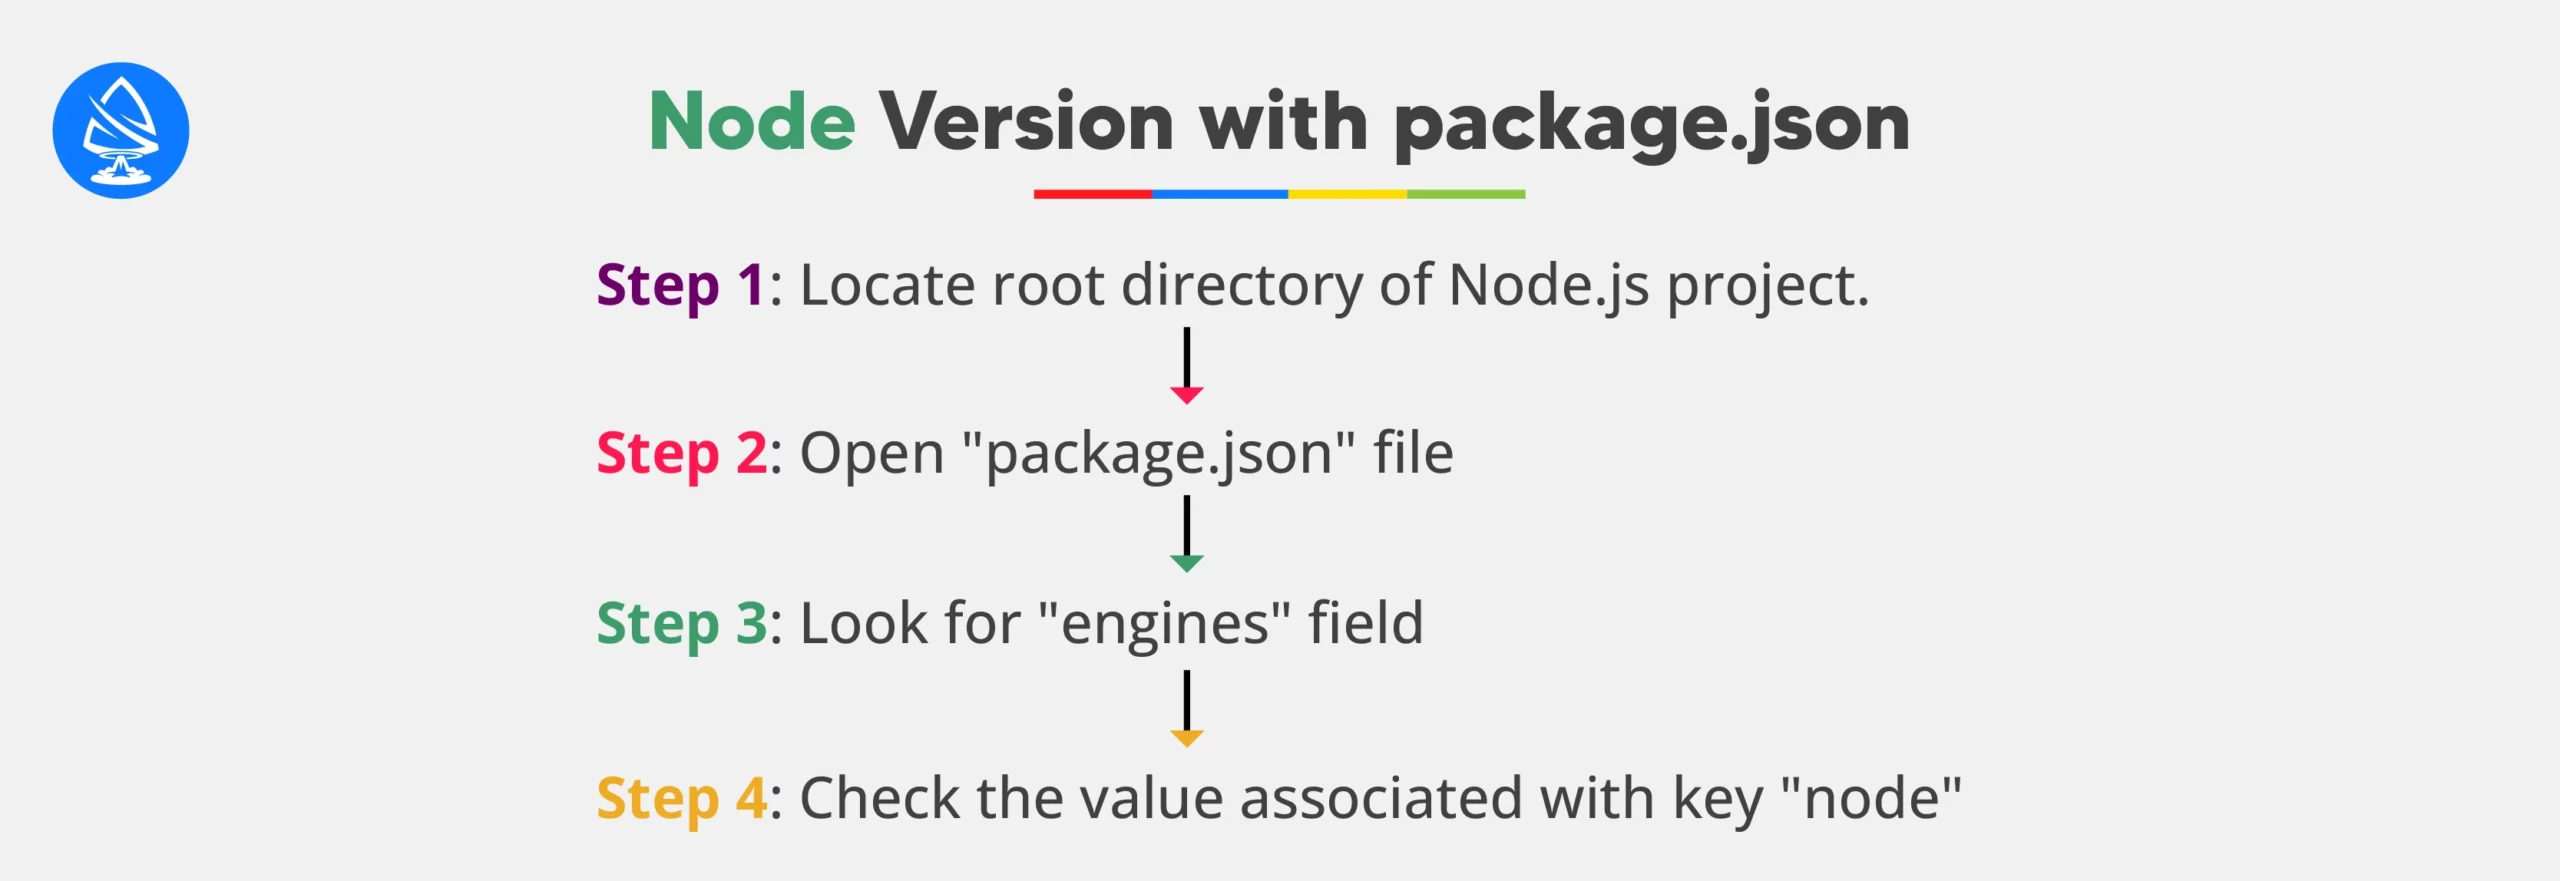 Viewing Node Version in Package.json 